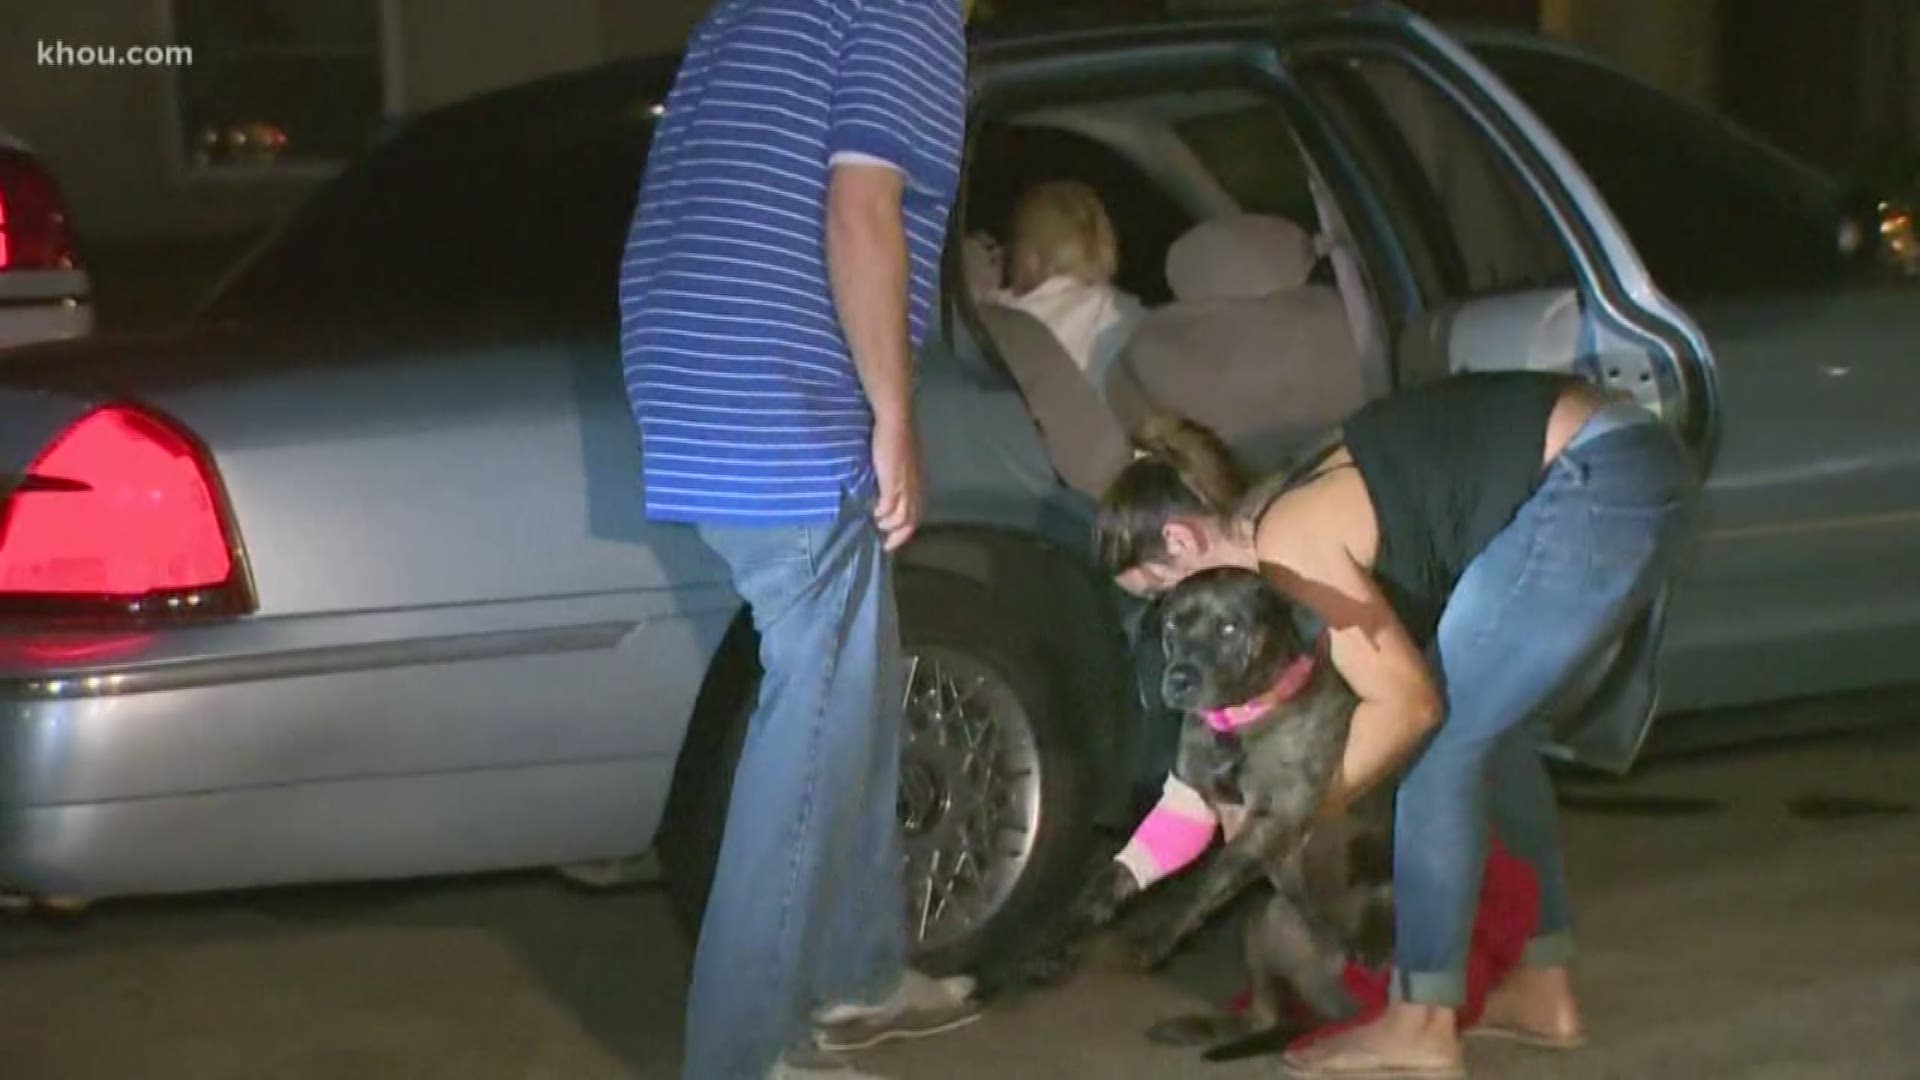 A family dog tried to protect her family as gunmen held a father down during a home invasion overnight.